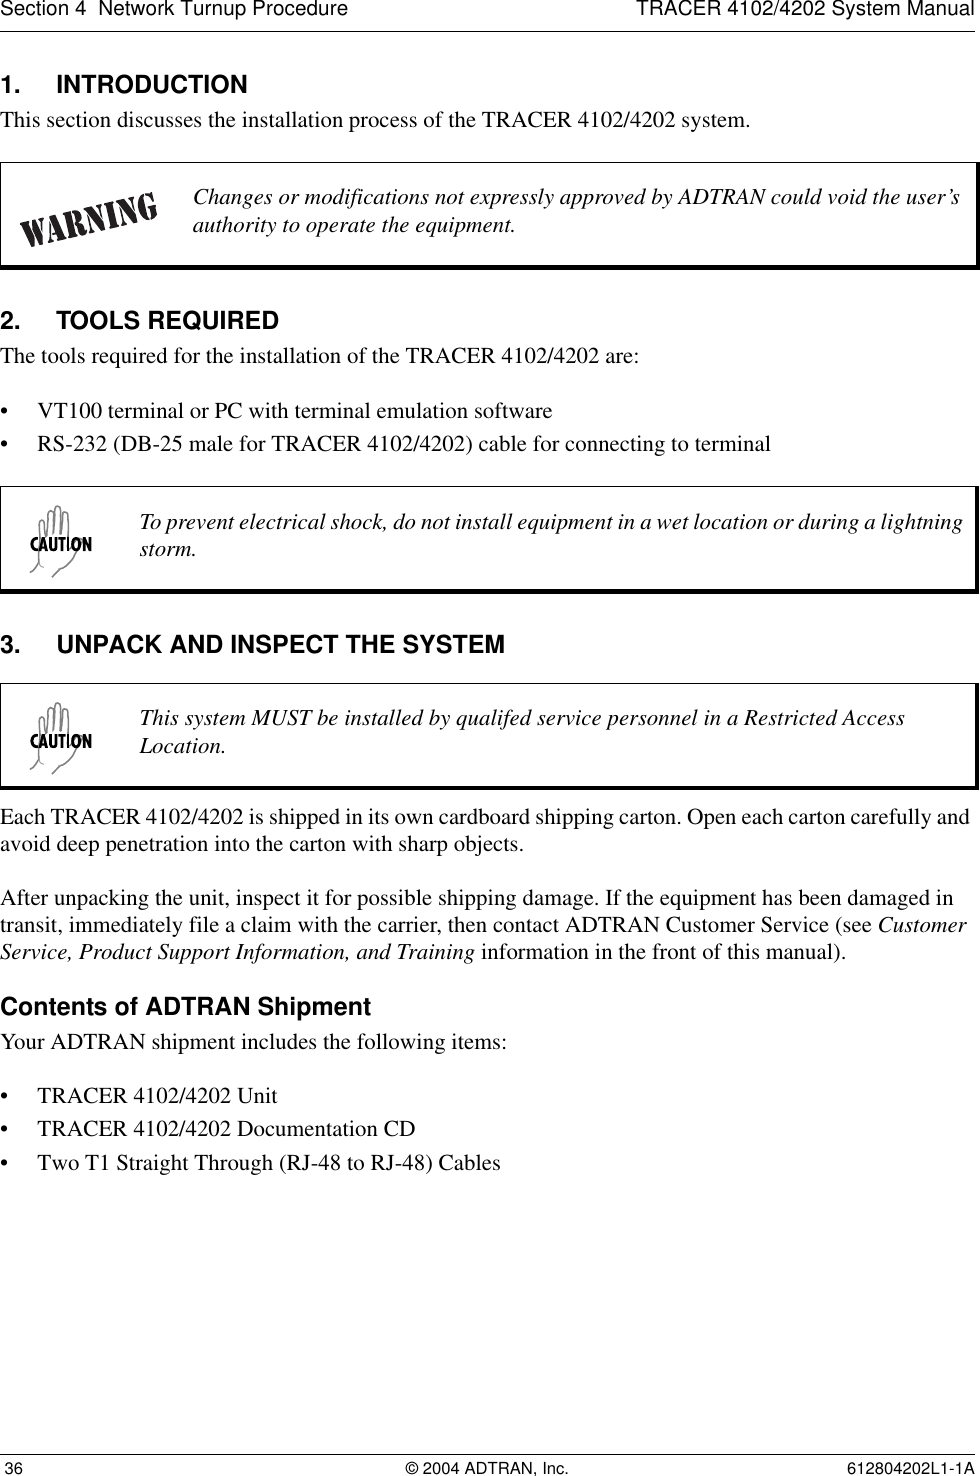 Section 4  Network Turnup Procedure TRACER 4102/4202 System Manual 36 © 2004 ADTRAN, Inc. 612804202L1-1A1. INTRODUCTIONThis section discusses the installation process of the TRACER 4102/4202 system.2. TOOLS REQUIREDThe tools required for the installation of the TRACER 4102/4202 are:• VT100 terminal or PC with terminal emulation software• RS-232 (DB-25 male for TRACER 4102/4202) cable for connecting to terminal3. UNPACK AND INSPECT THE SYSTEMEach TRACER 4102/4202 is shipped in its own cardboard shipping carton. Open each carton carefully and avoid deep penetration into the carton with sharp objects. After unpacking the unit, inspect it for possible shipping damage. If the equipment has been damaged in transit, immediately file a claim with the carrier, then contact ADTRAN Customer Service (see Customer Service, Product Support Information, and Training information in the front of this manual).Contents of ADTRAN ShipmentYour ADTRAN shipment includes the following items:• TRACER 4102/4202 Unit• TRACER 4102/4202 Documentation CD• Two T1 Straight Through (RJ-48 to RJ-48) CablesChanges or modifications not expressly approved by ADTRAN could void the user’s authority to operate the equipment.To prevent electrical shock, do not install equipment in a wet location or during a lightning storm.This system MUST be installed by qualifed service personnel in a Restricted Access Location.